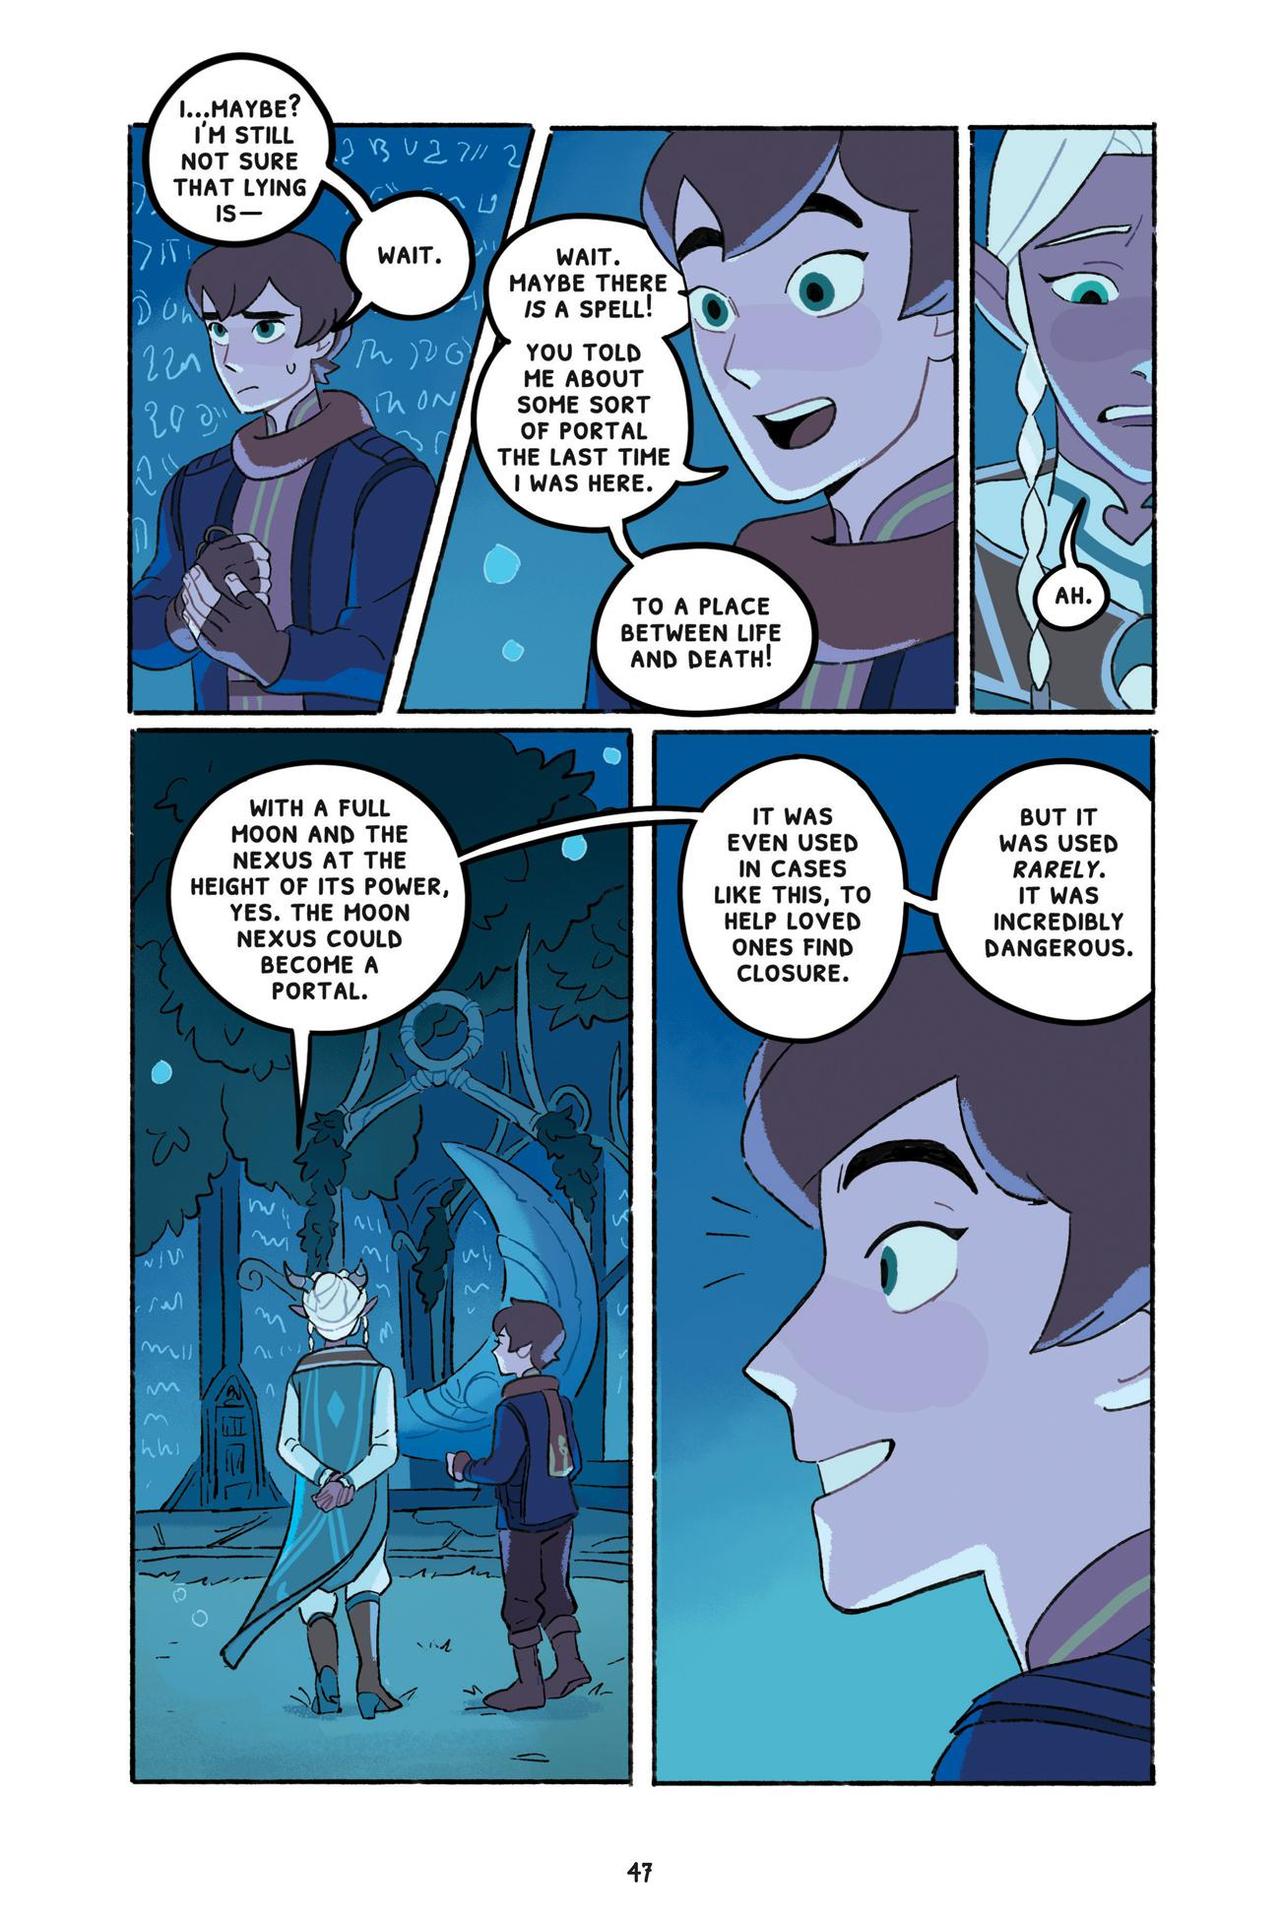 Through the Moon: The Dragon Prince Graphic Novel (2020) Chapter 1 - Page 51